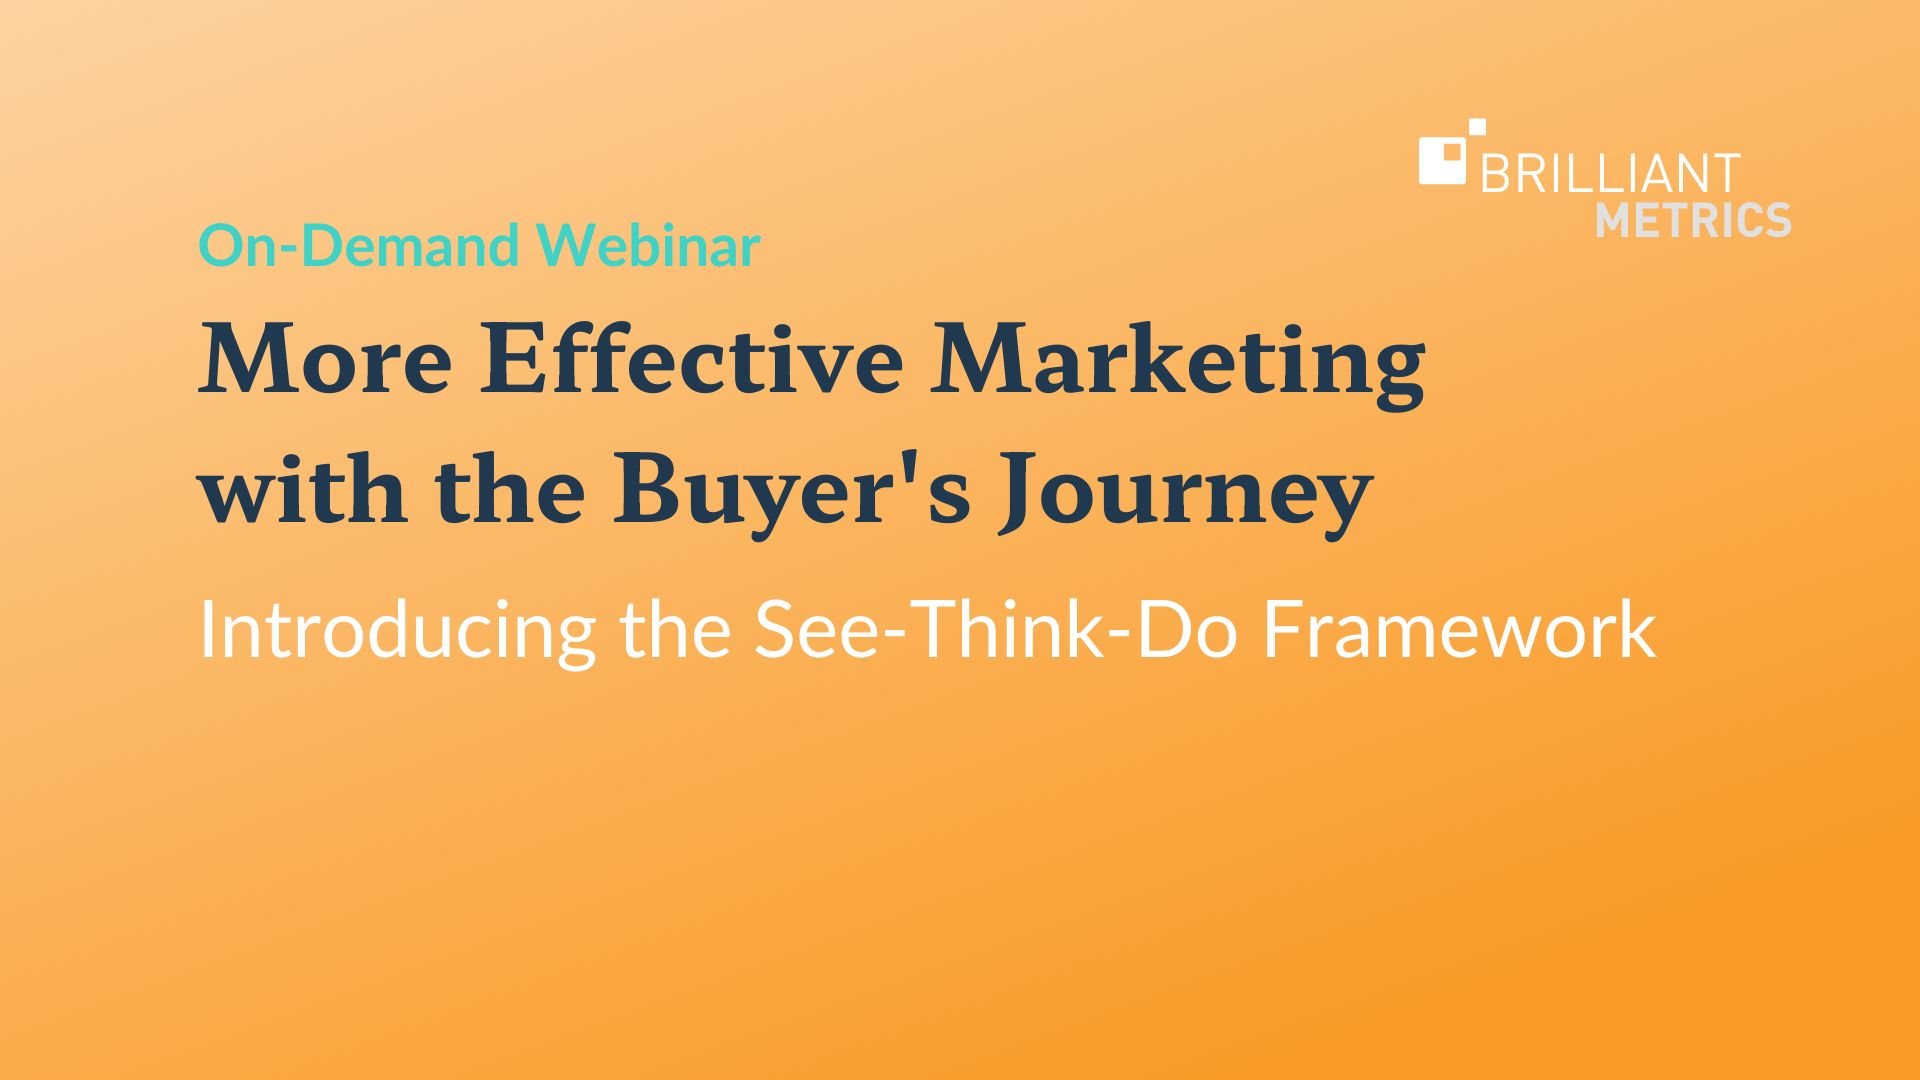 More Effective Marketing with the Buyer’s Journey